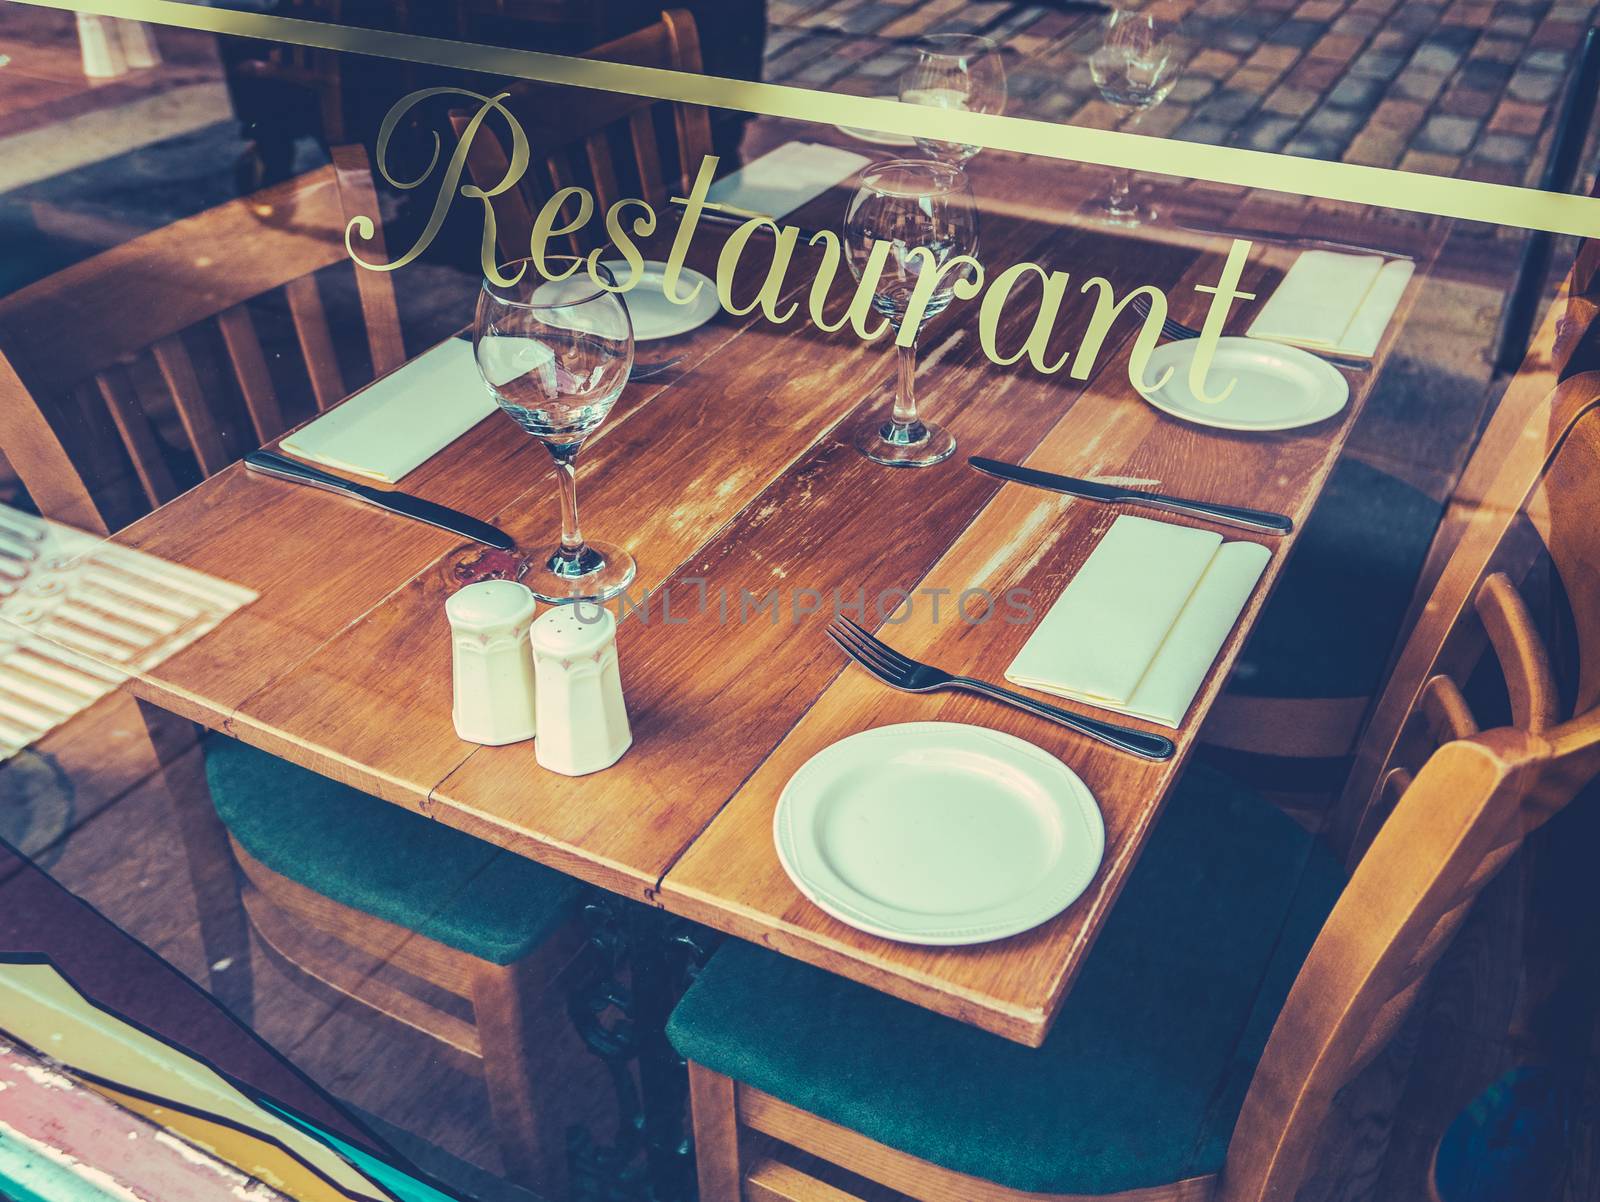 Retro Style Street Image Of A Rustic Restaurant Table Through A Window On A Cobblestone Street In Europe